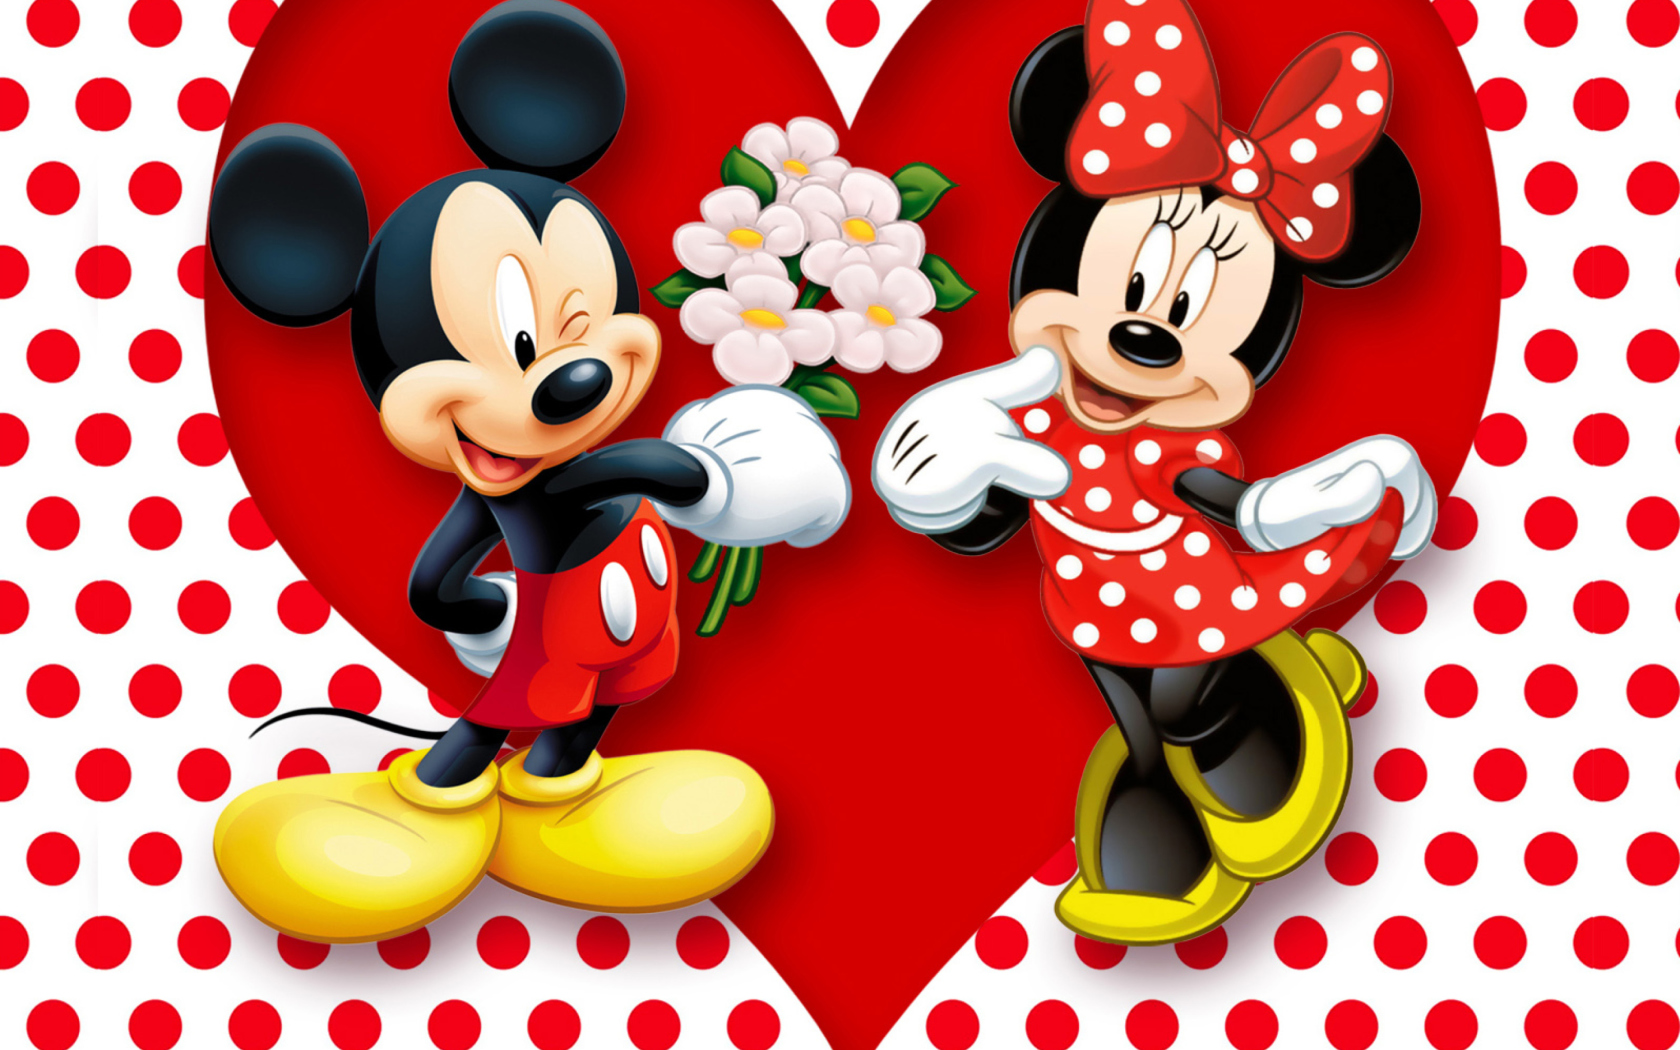 Mickey And Minnie Mouse wallpaper 1680x1050